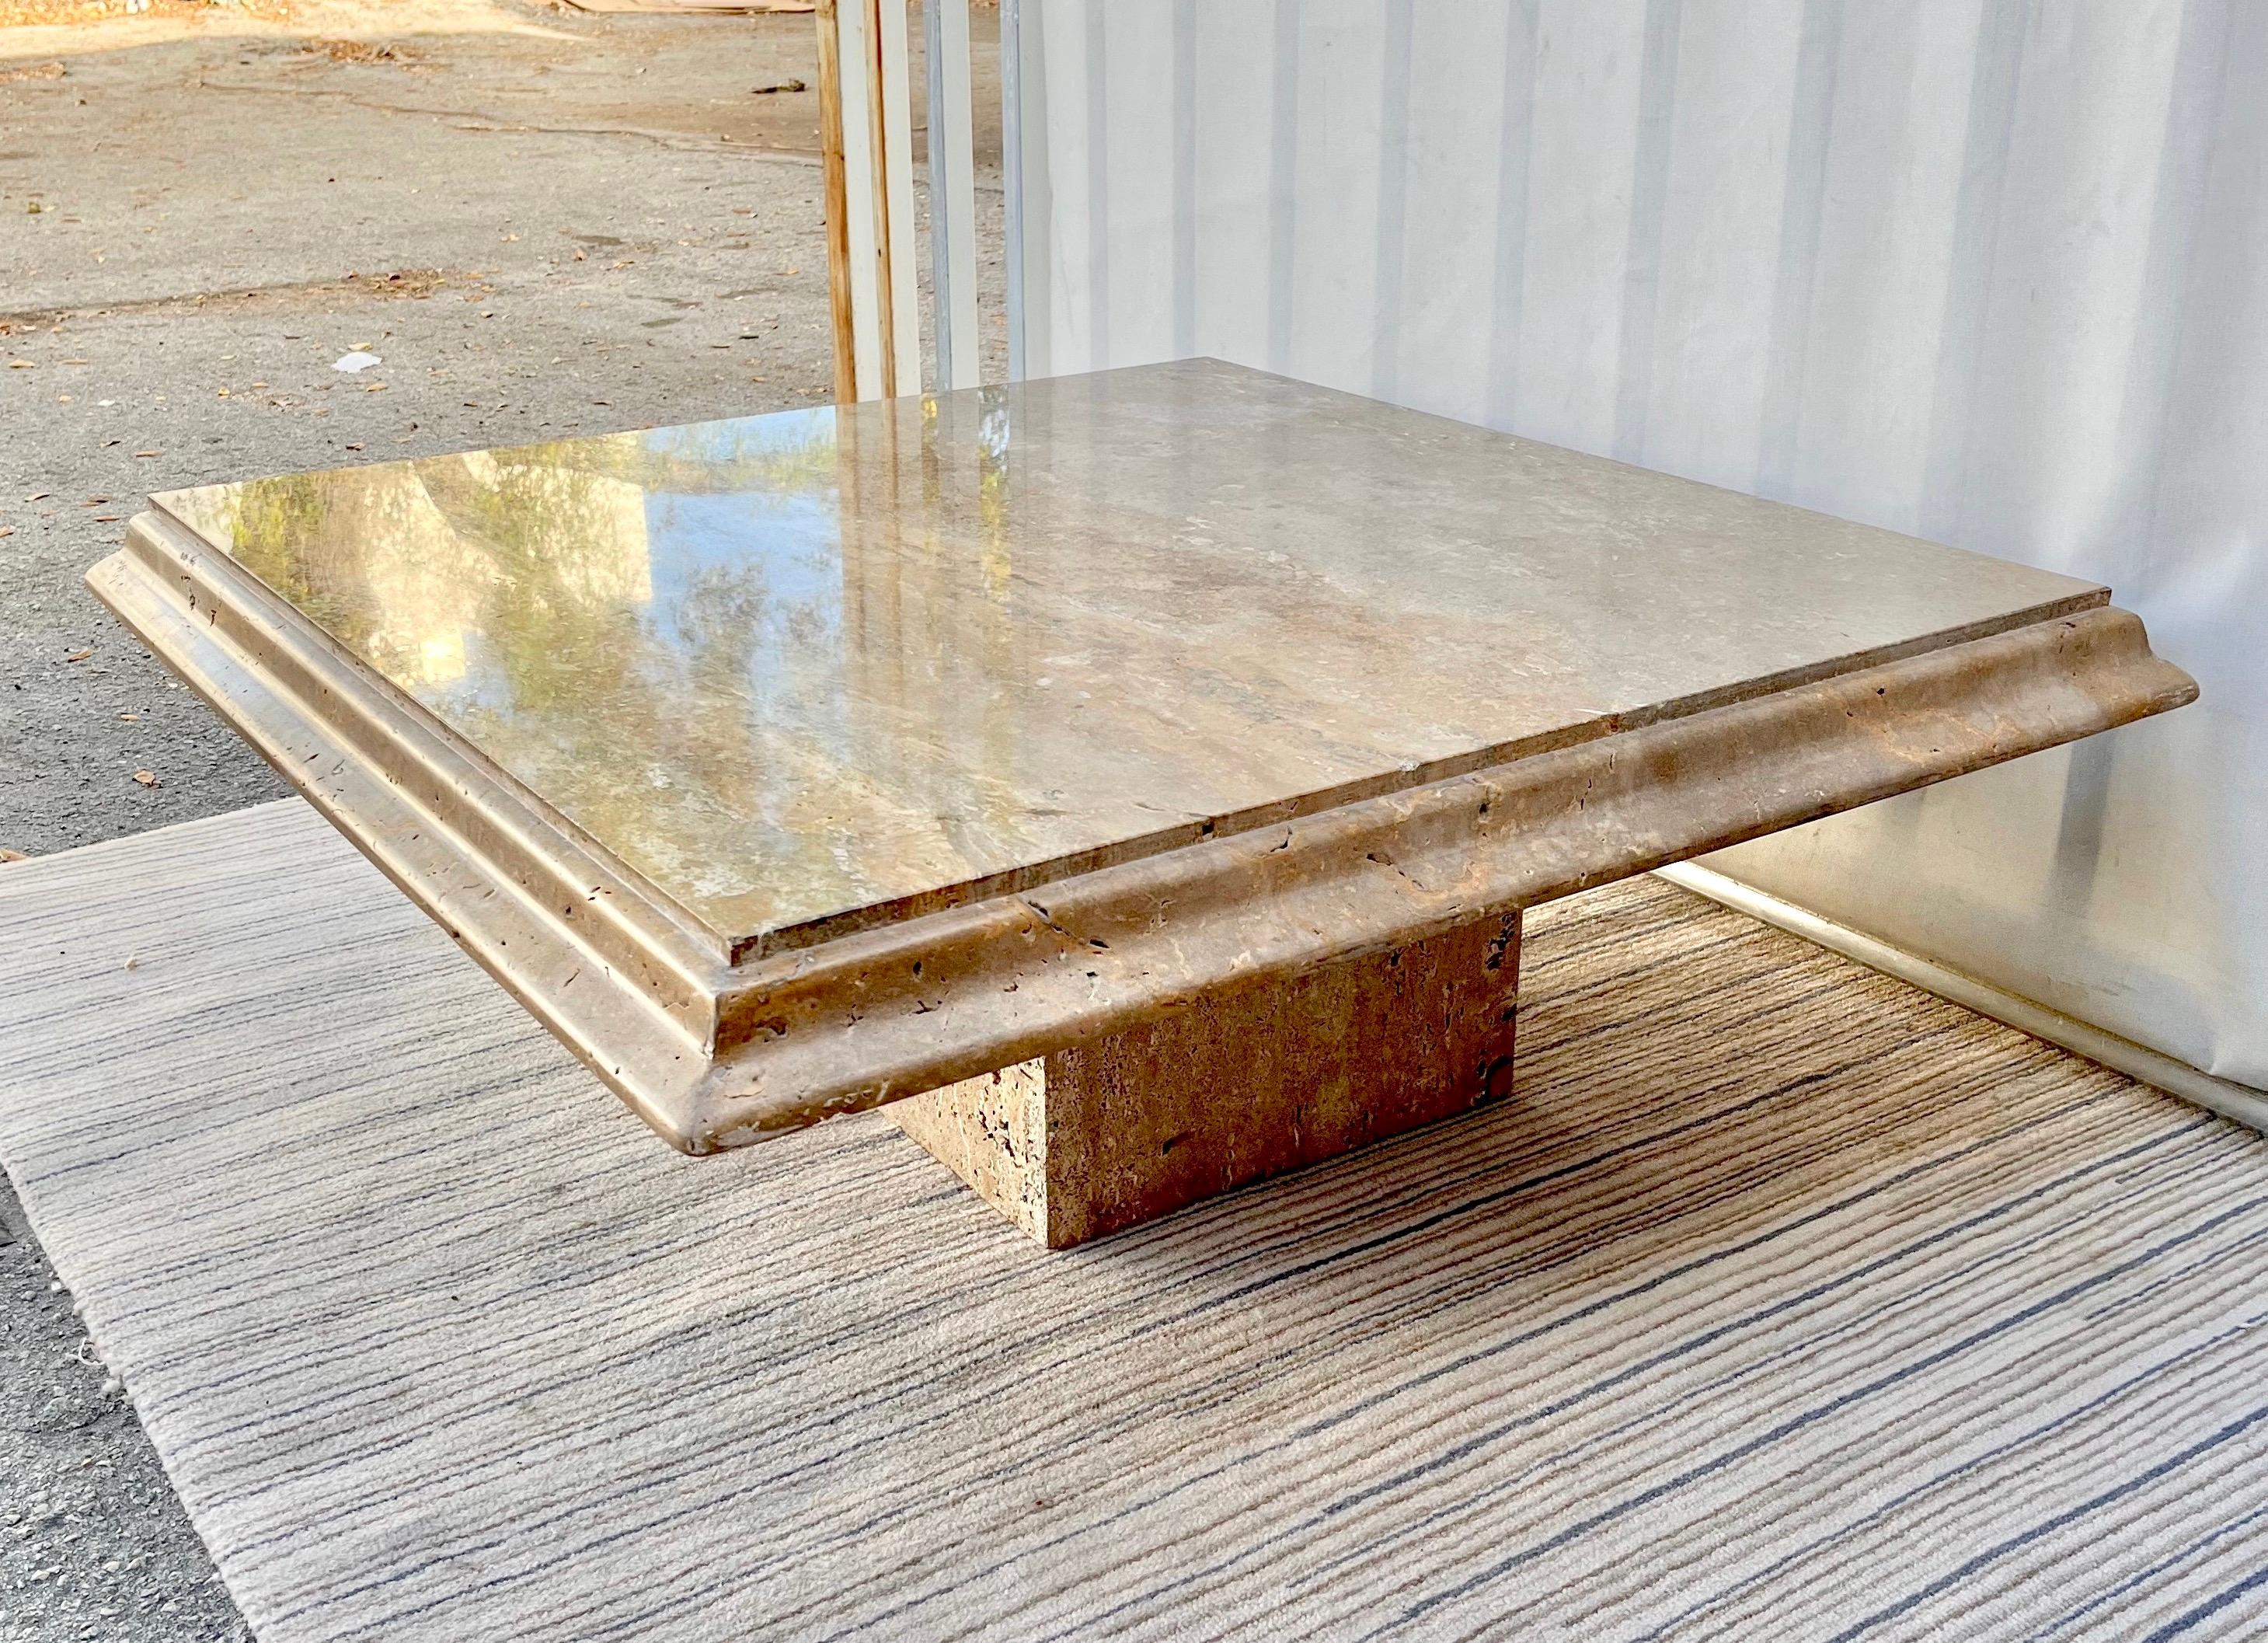 Vintage Postmodern Italian Travertine coffee table by Stone Intentional Italy. Circa 1980s.
Features a nicely curved border at edges and a gorgeous natural grain.
Top removes for easy transportation.
In very good original condition with minor